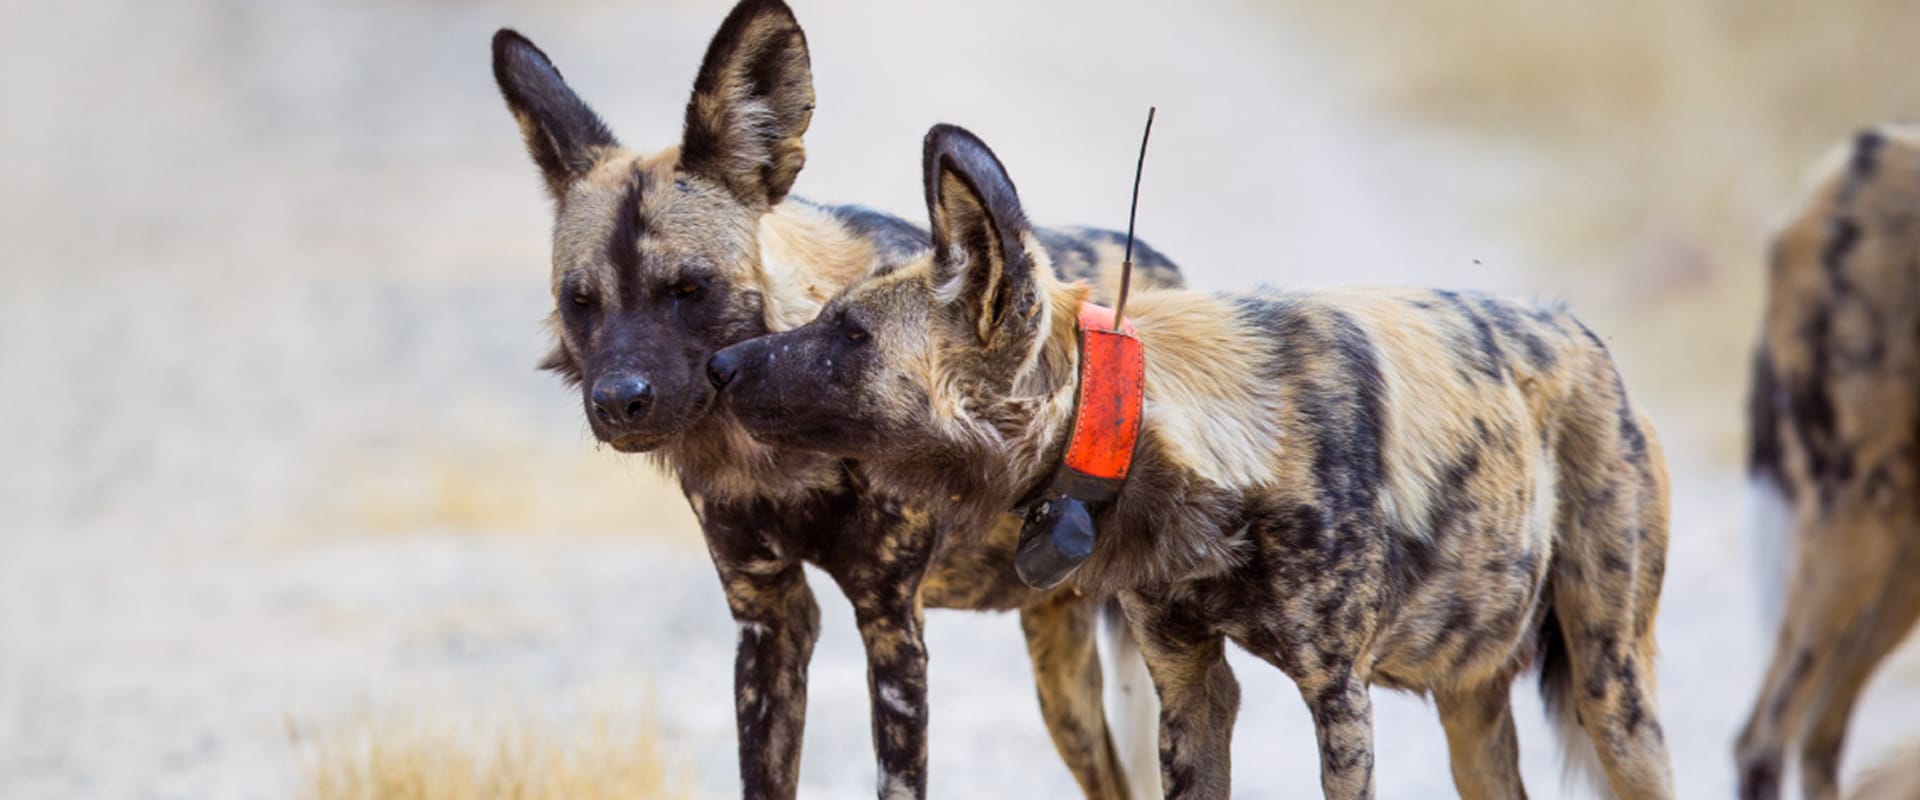 Visit the Painted Dog Conservation Centre